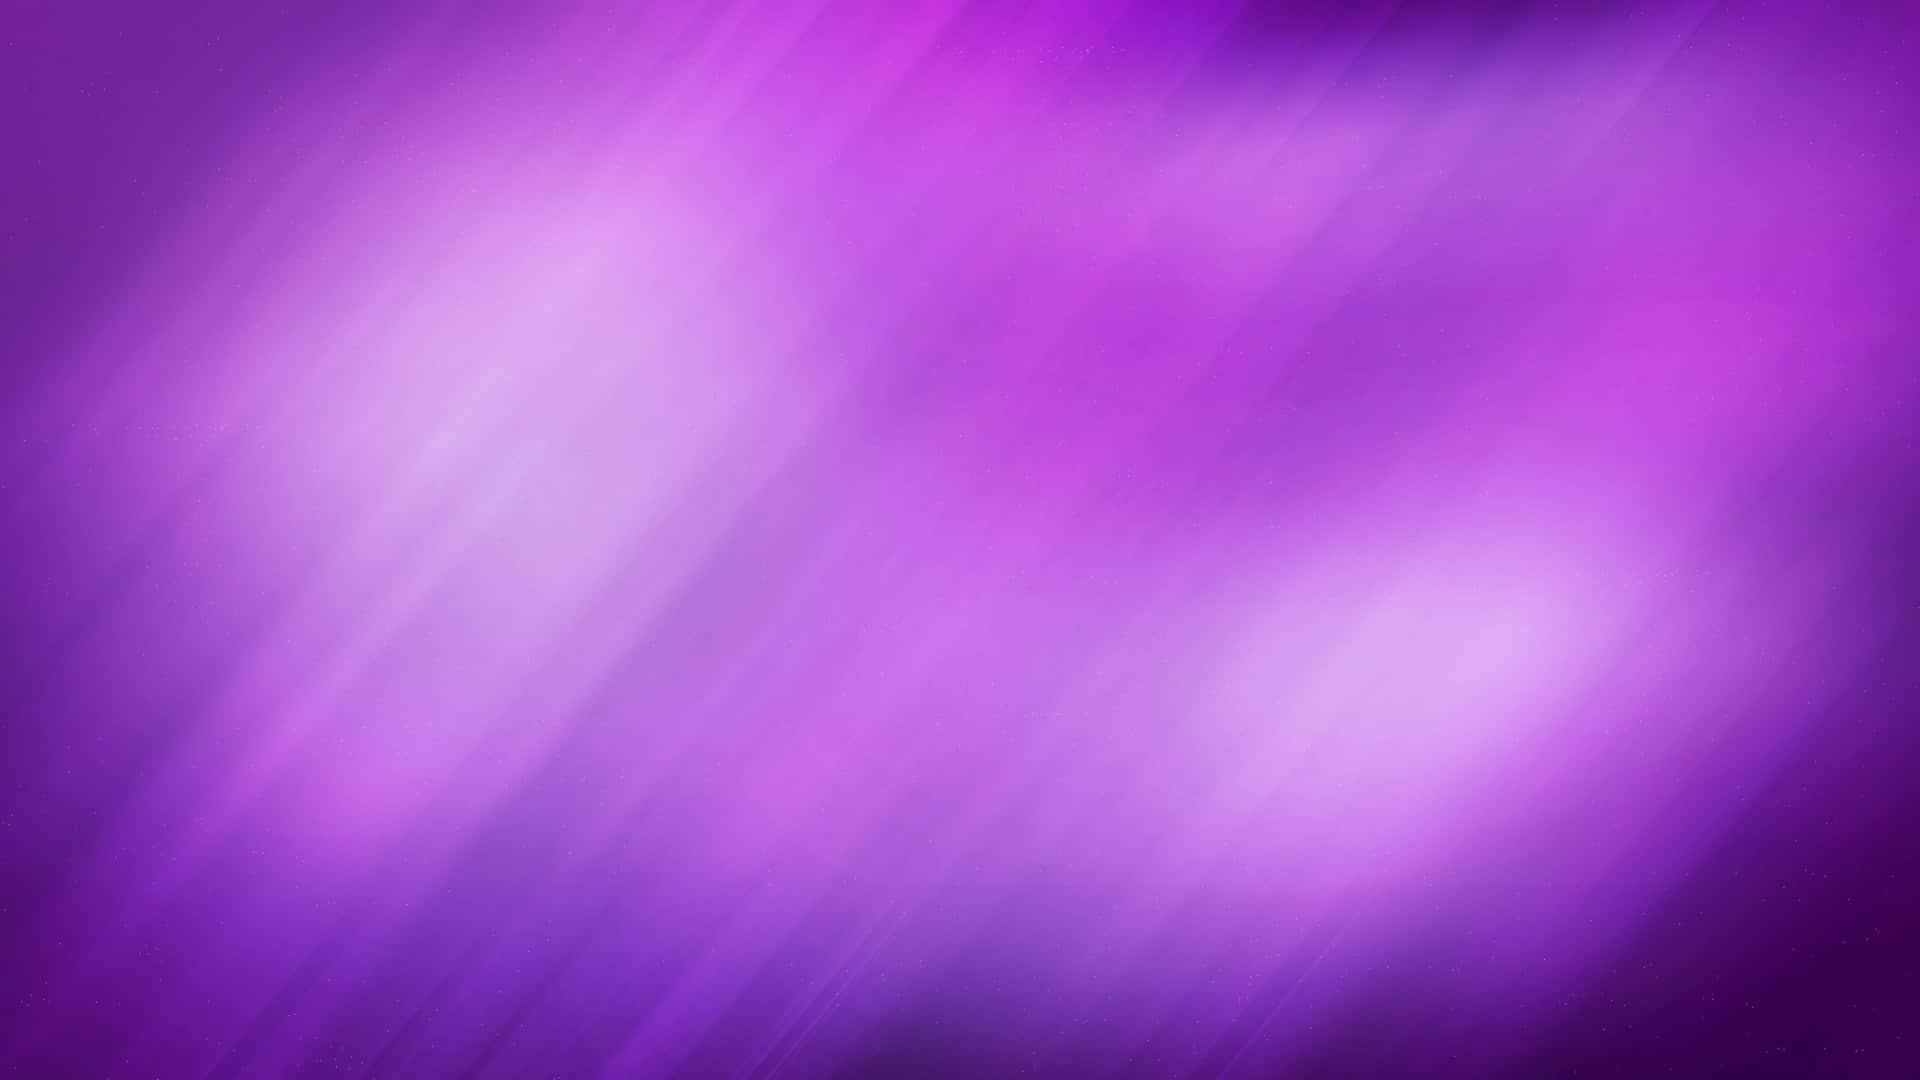 A vibrant background of solid purple.